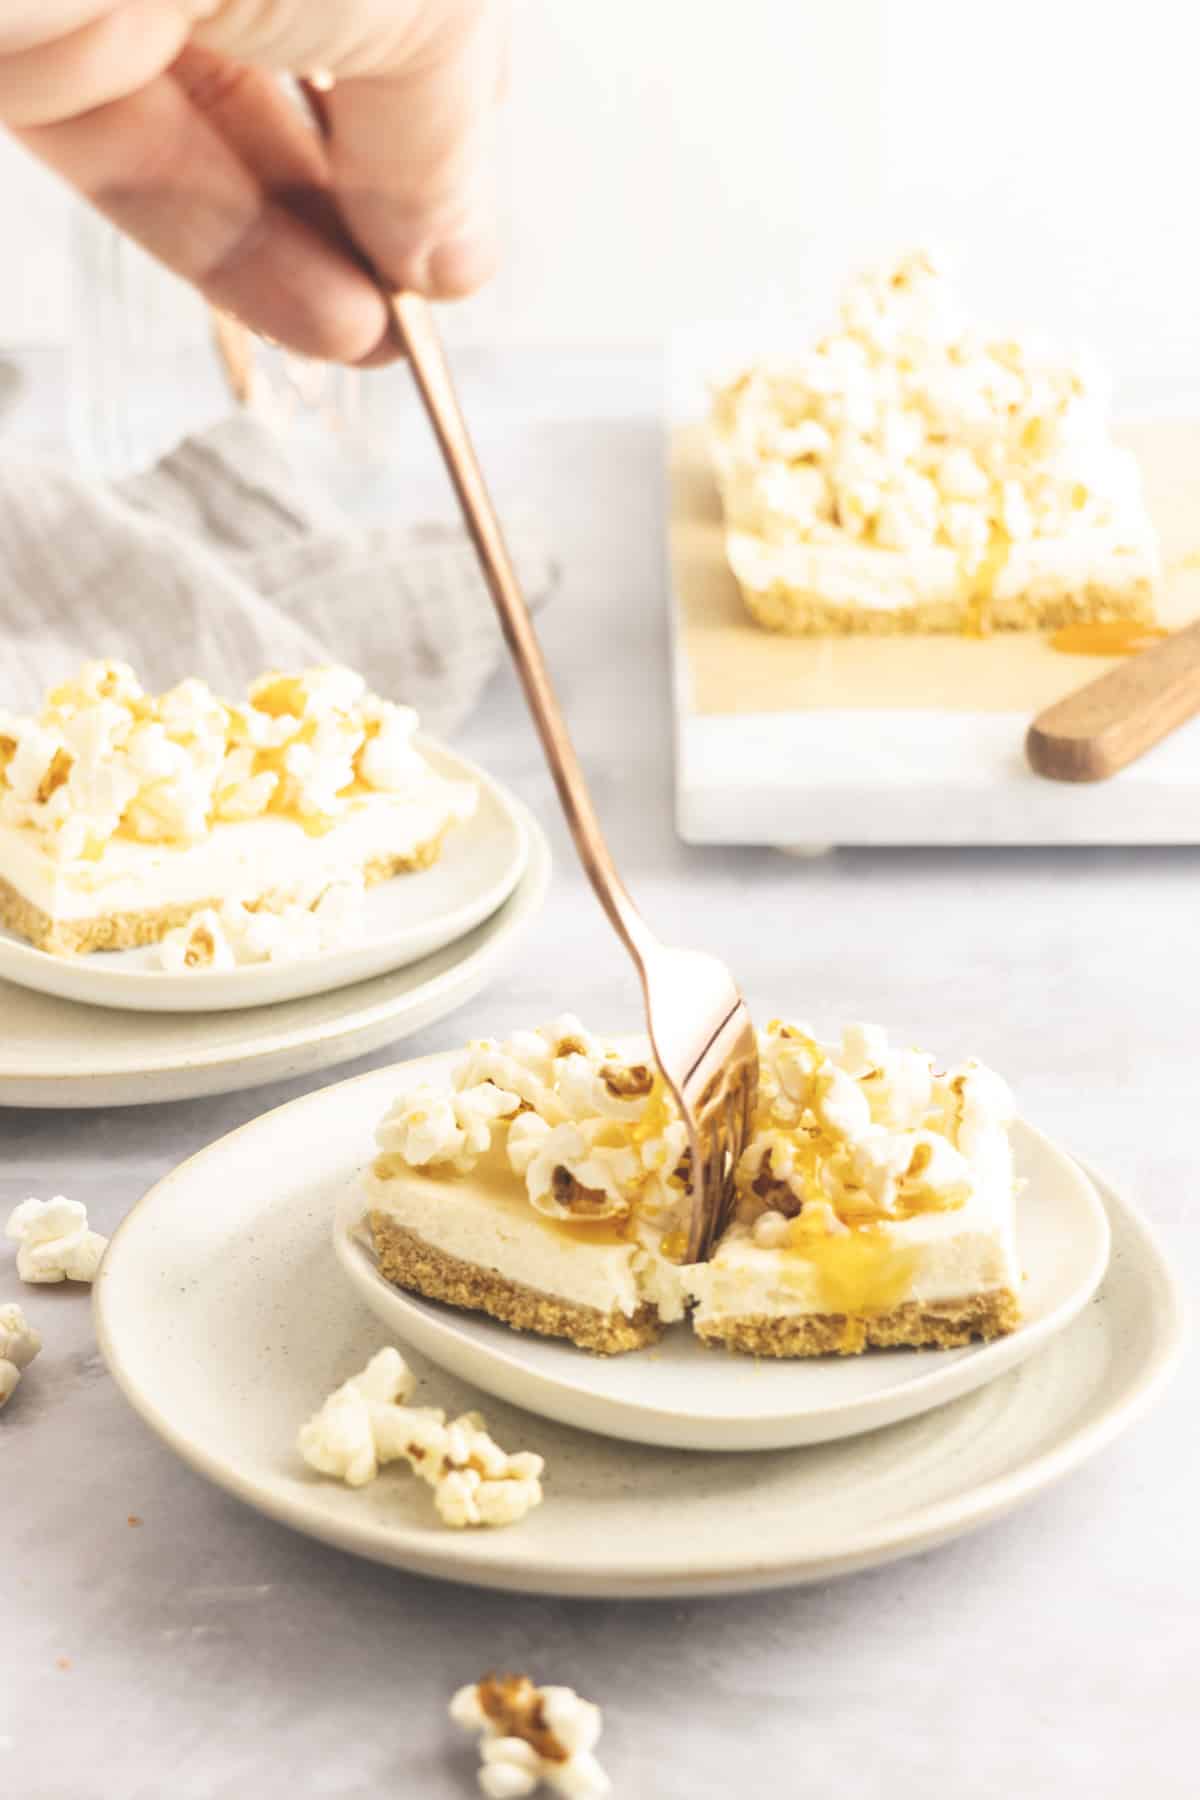 Popcorn bar drizzled with toffee sauce and a fork being placed in it